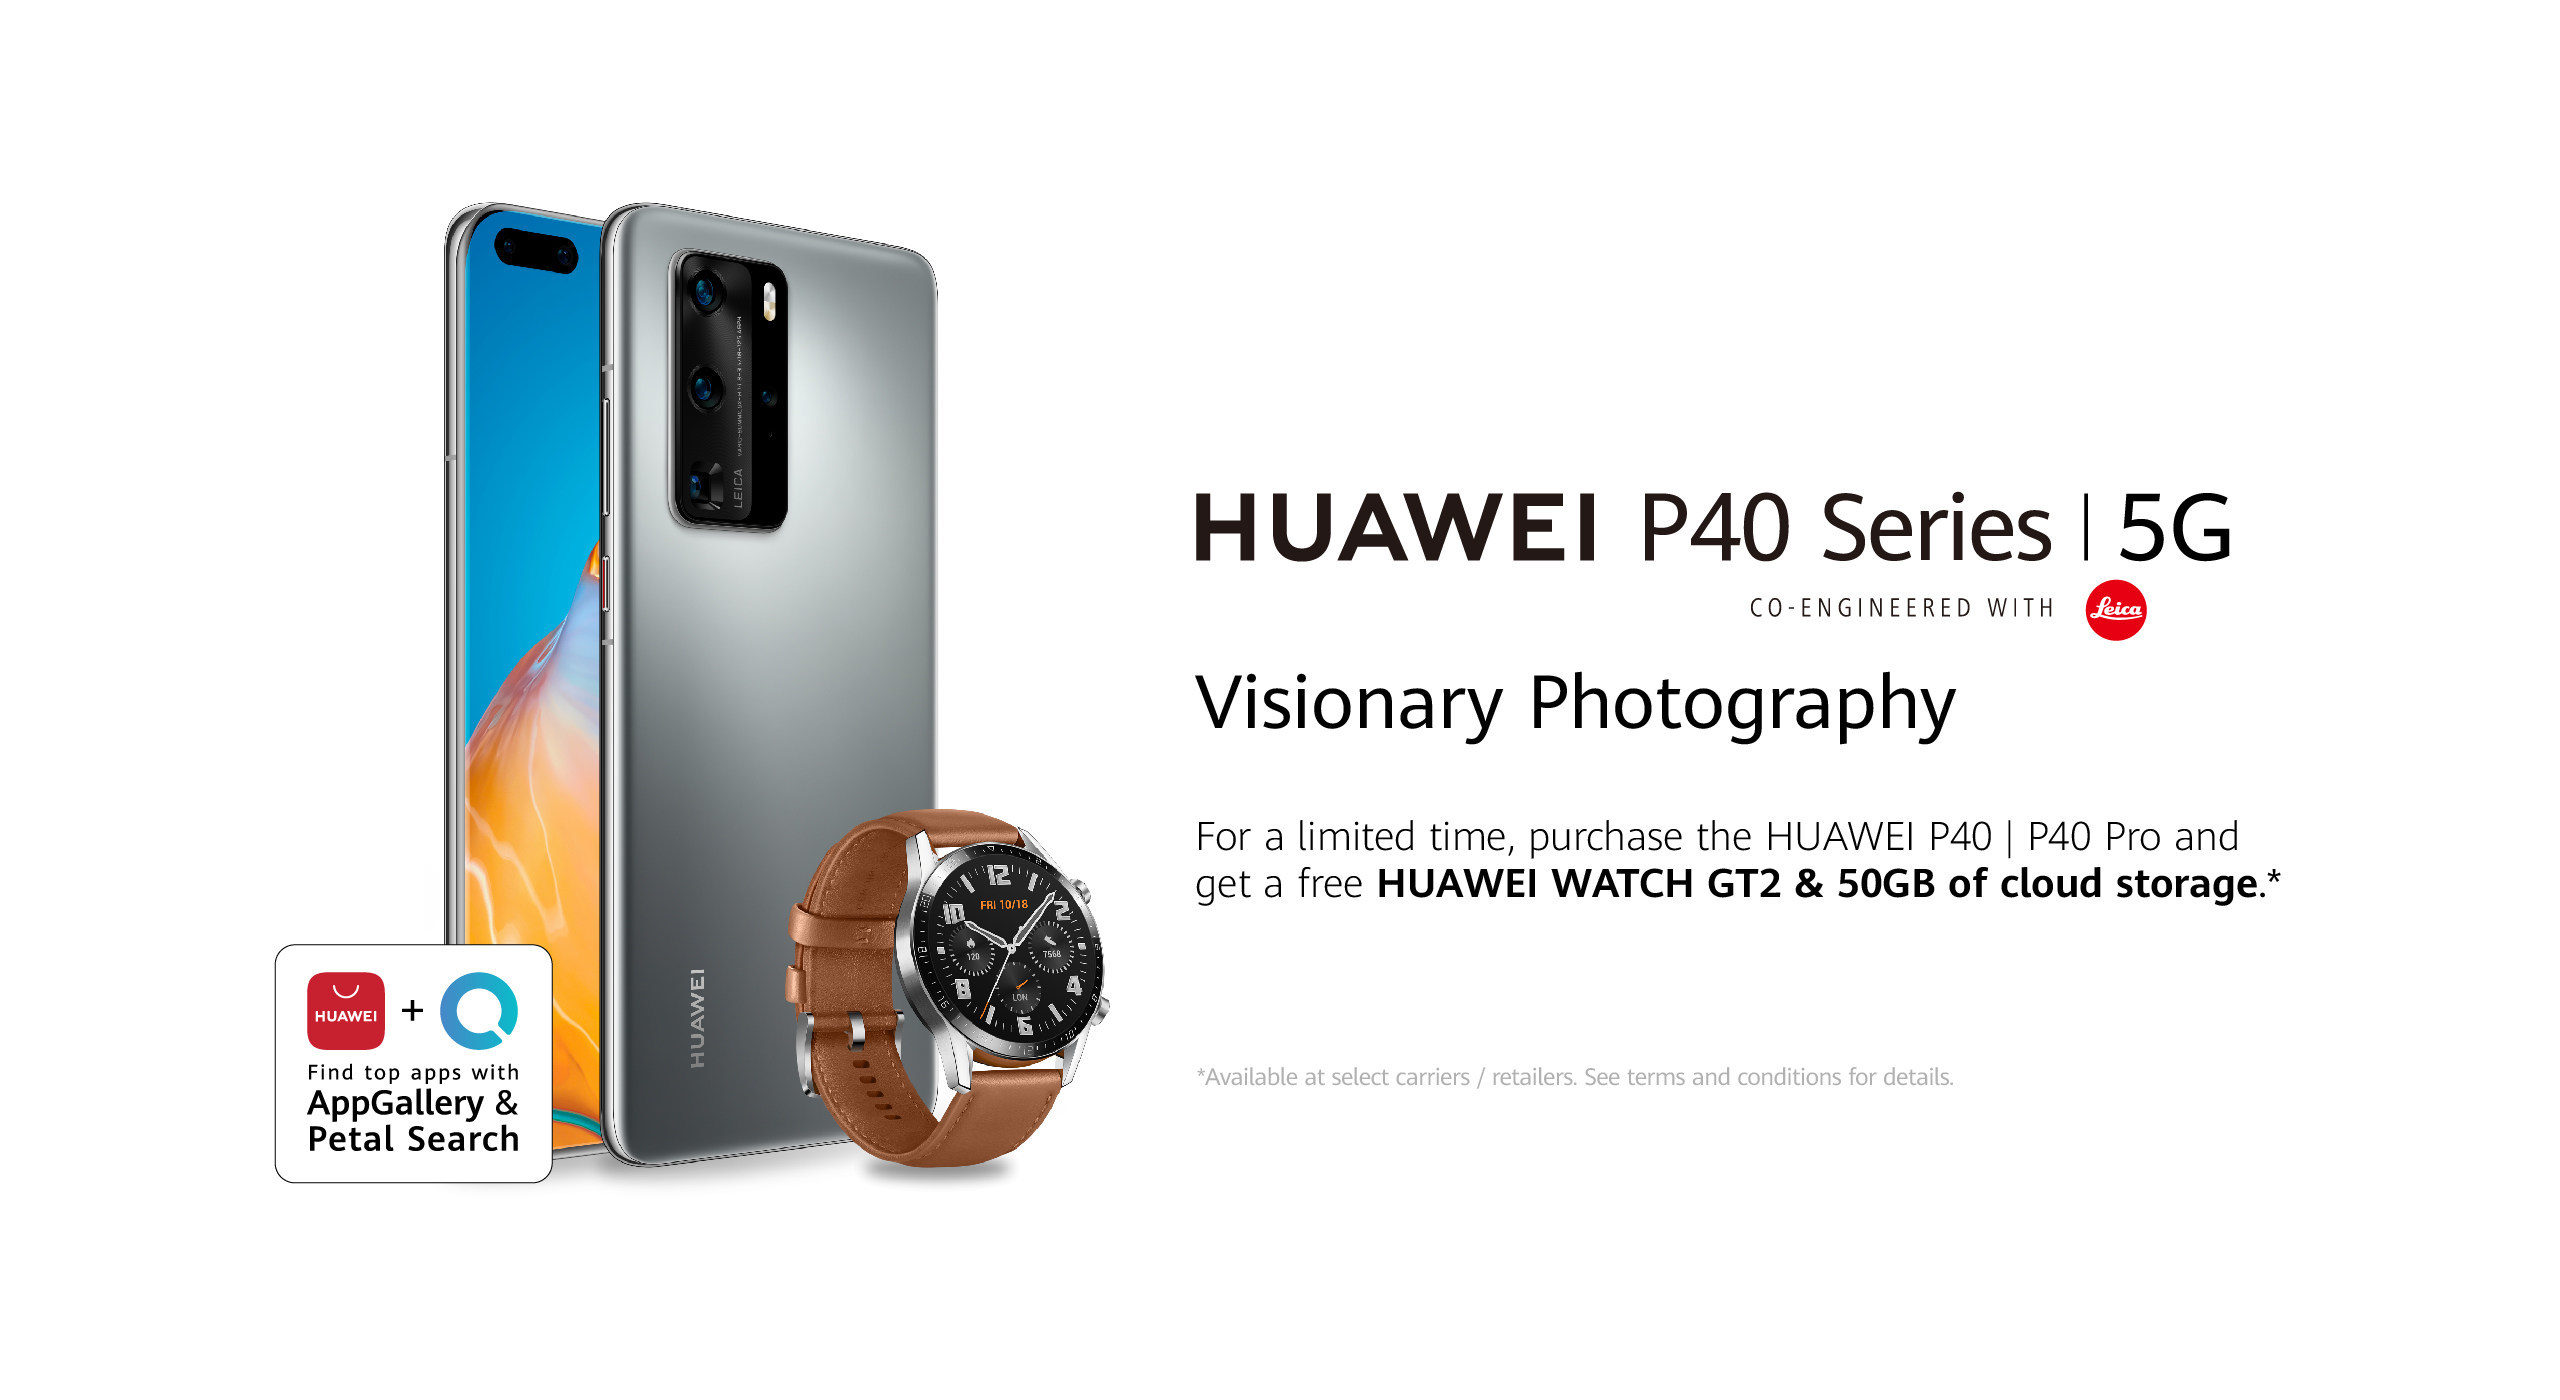 Huawei P40 Series 5g With World S Best Smartphone Camera And The New Huawei Appgallery And Petal Search Now Available In Canada - playing survivor for the first time roblox amino